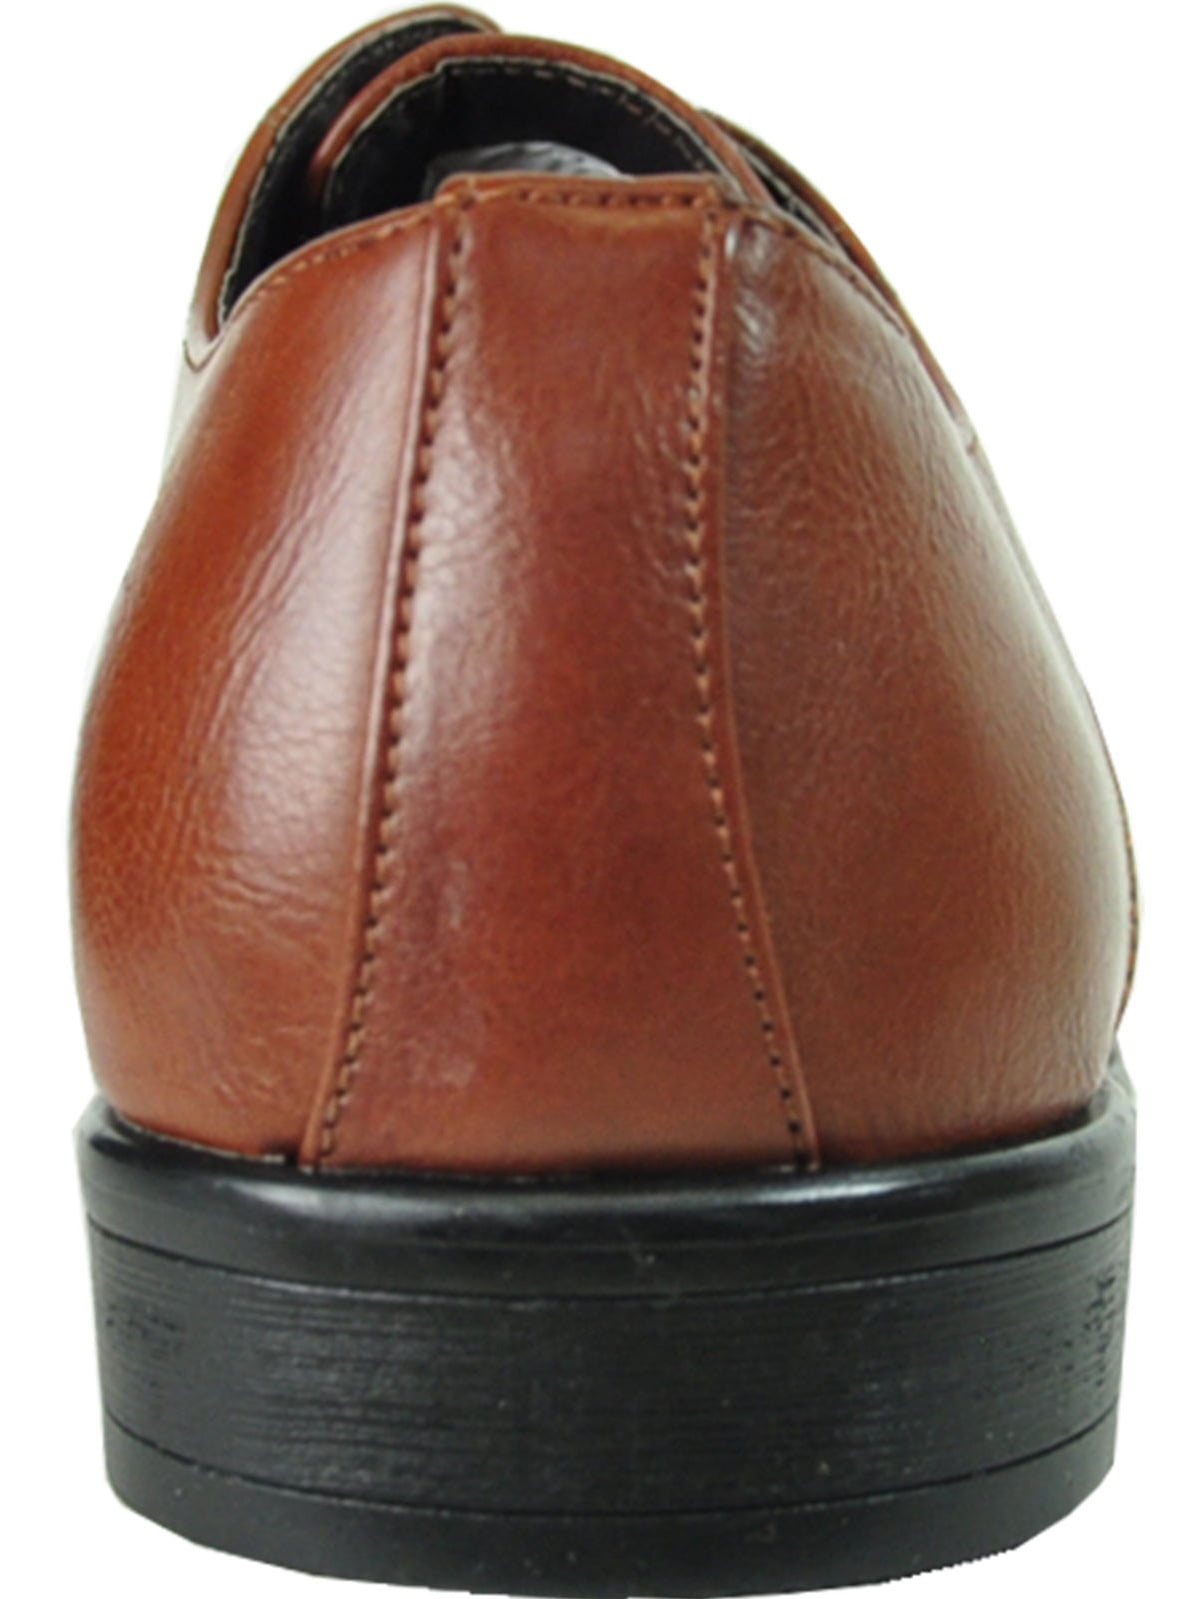 BRAVO Men Dress Shoe KING-1 Classic Oxford with Leather Lining 